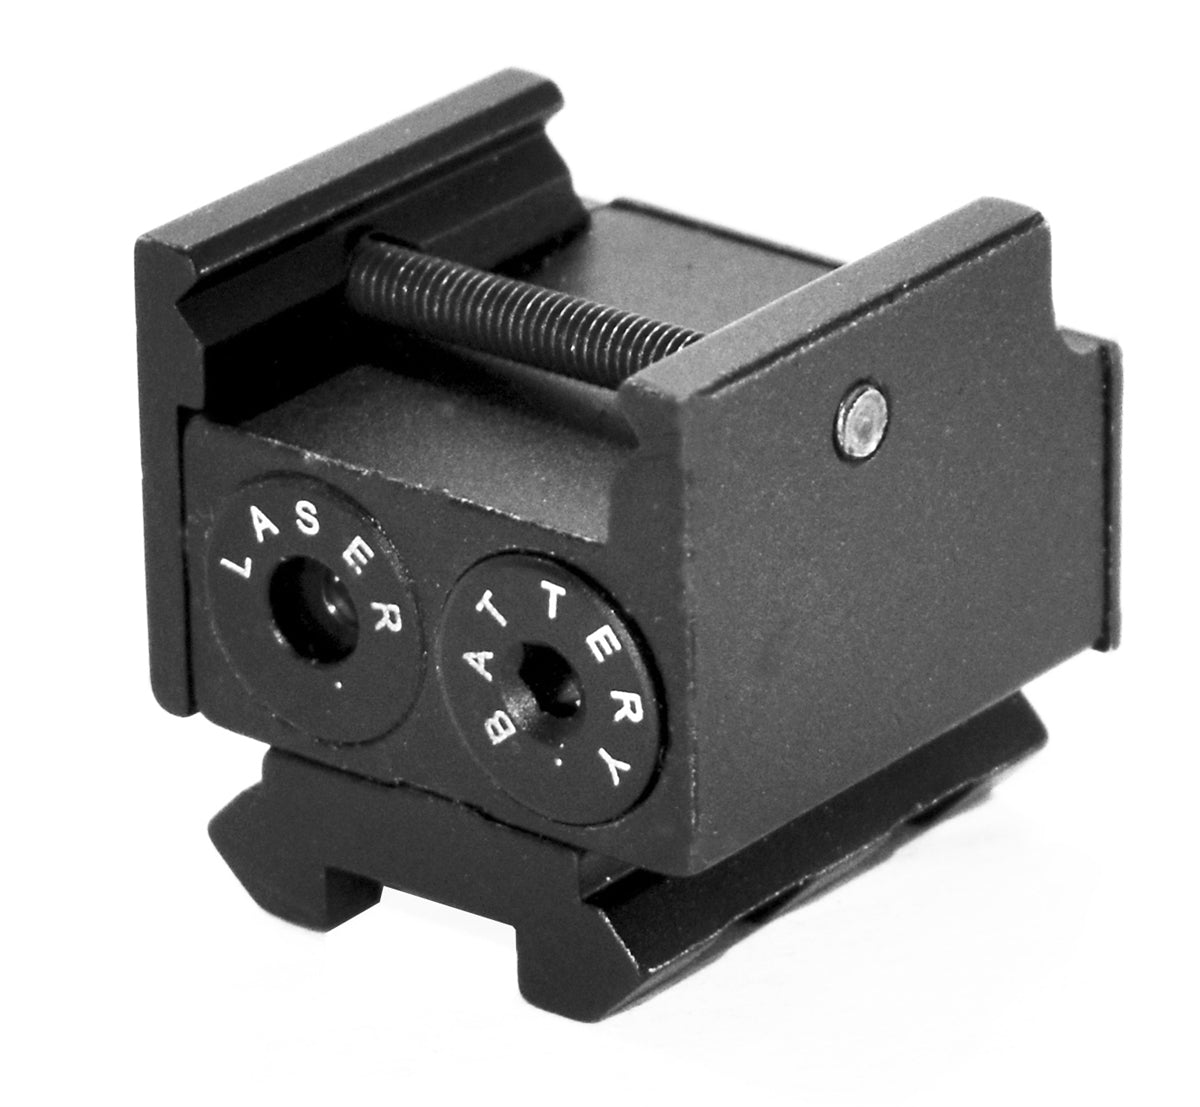 Trinity red dot sight for Keltec pmr 30 accessories aluminum upgrades black.